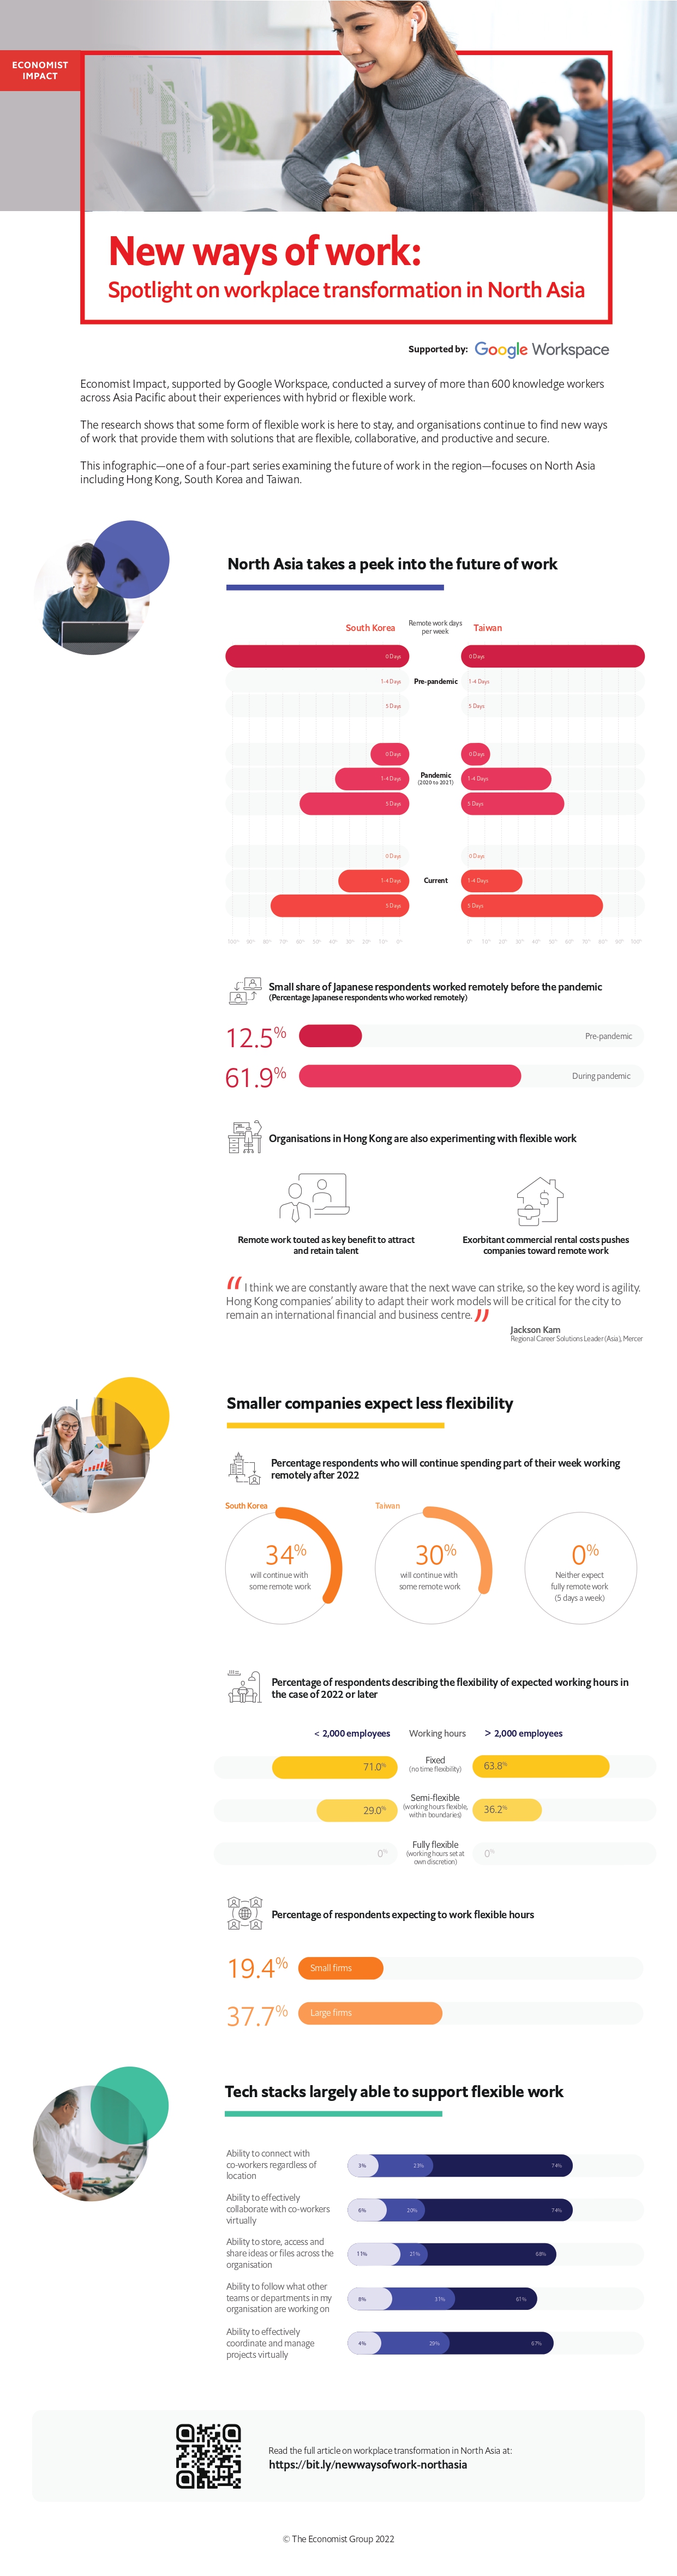 Infographic | New ways of work: Spotlight on workplace transformation in North Asia